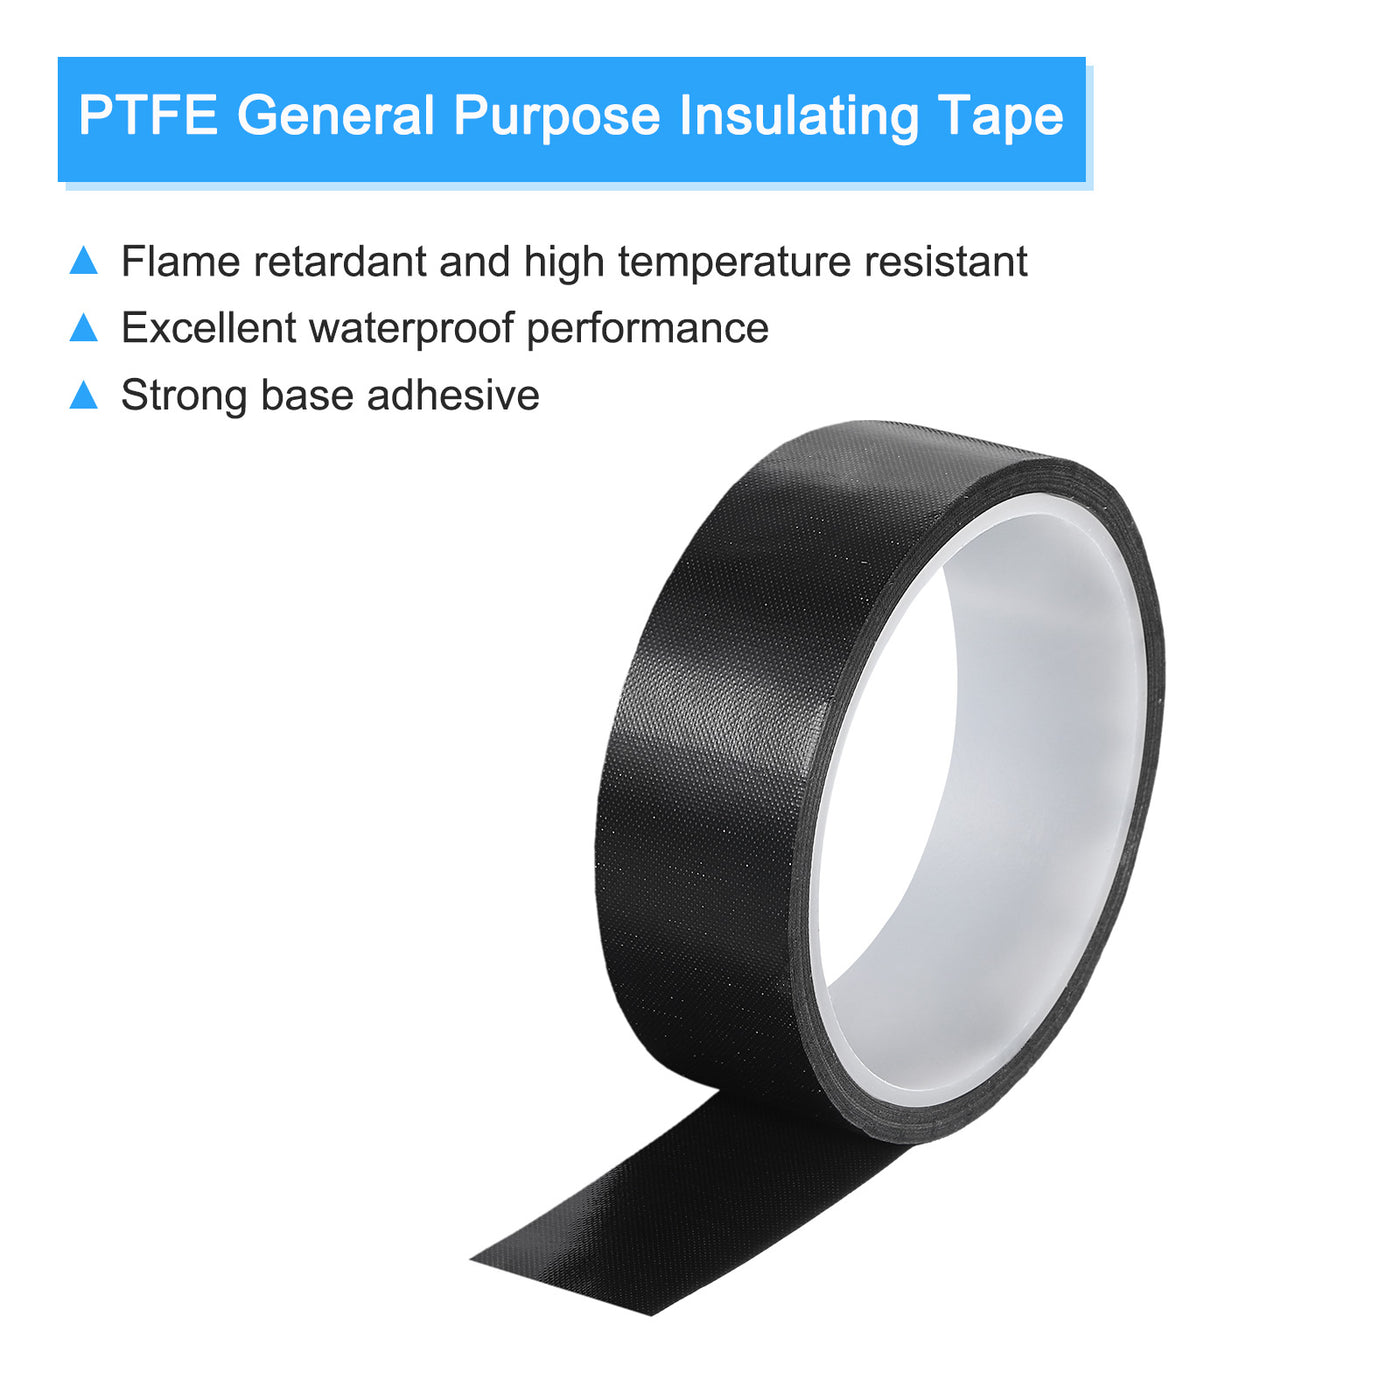 Harfington High Temperature Tape 30mm PTFE Coated Fabric Tape Heat Resistant Tape for Vacuum Sealers Adhesive Tape 10m/33ft Black 0.18mm Thickness